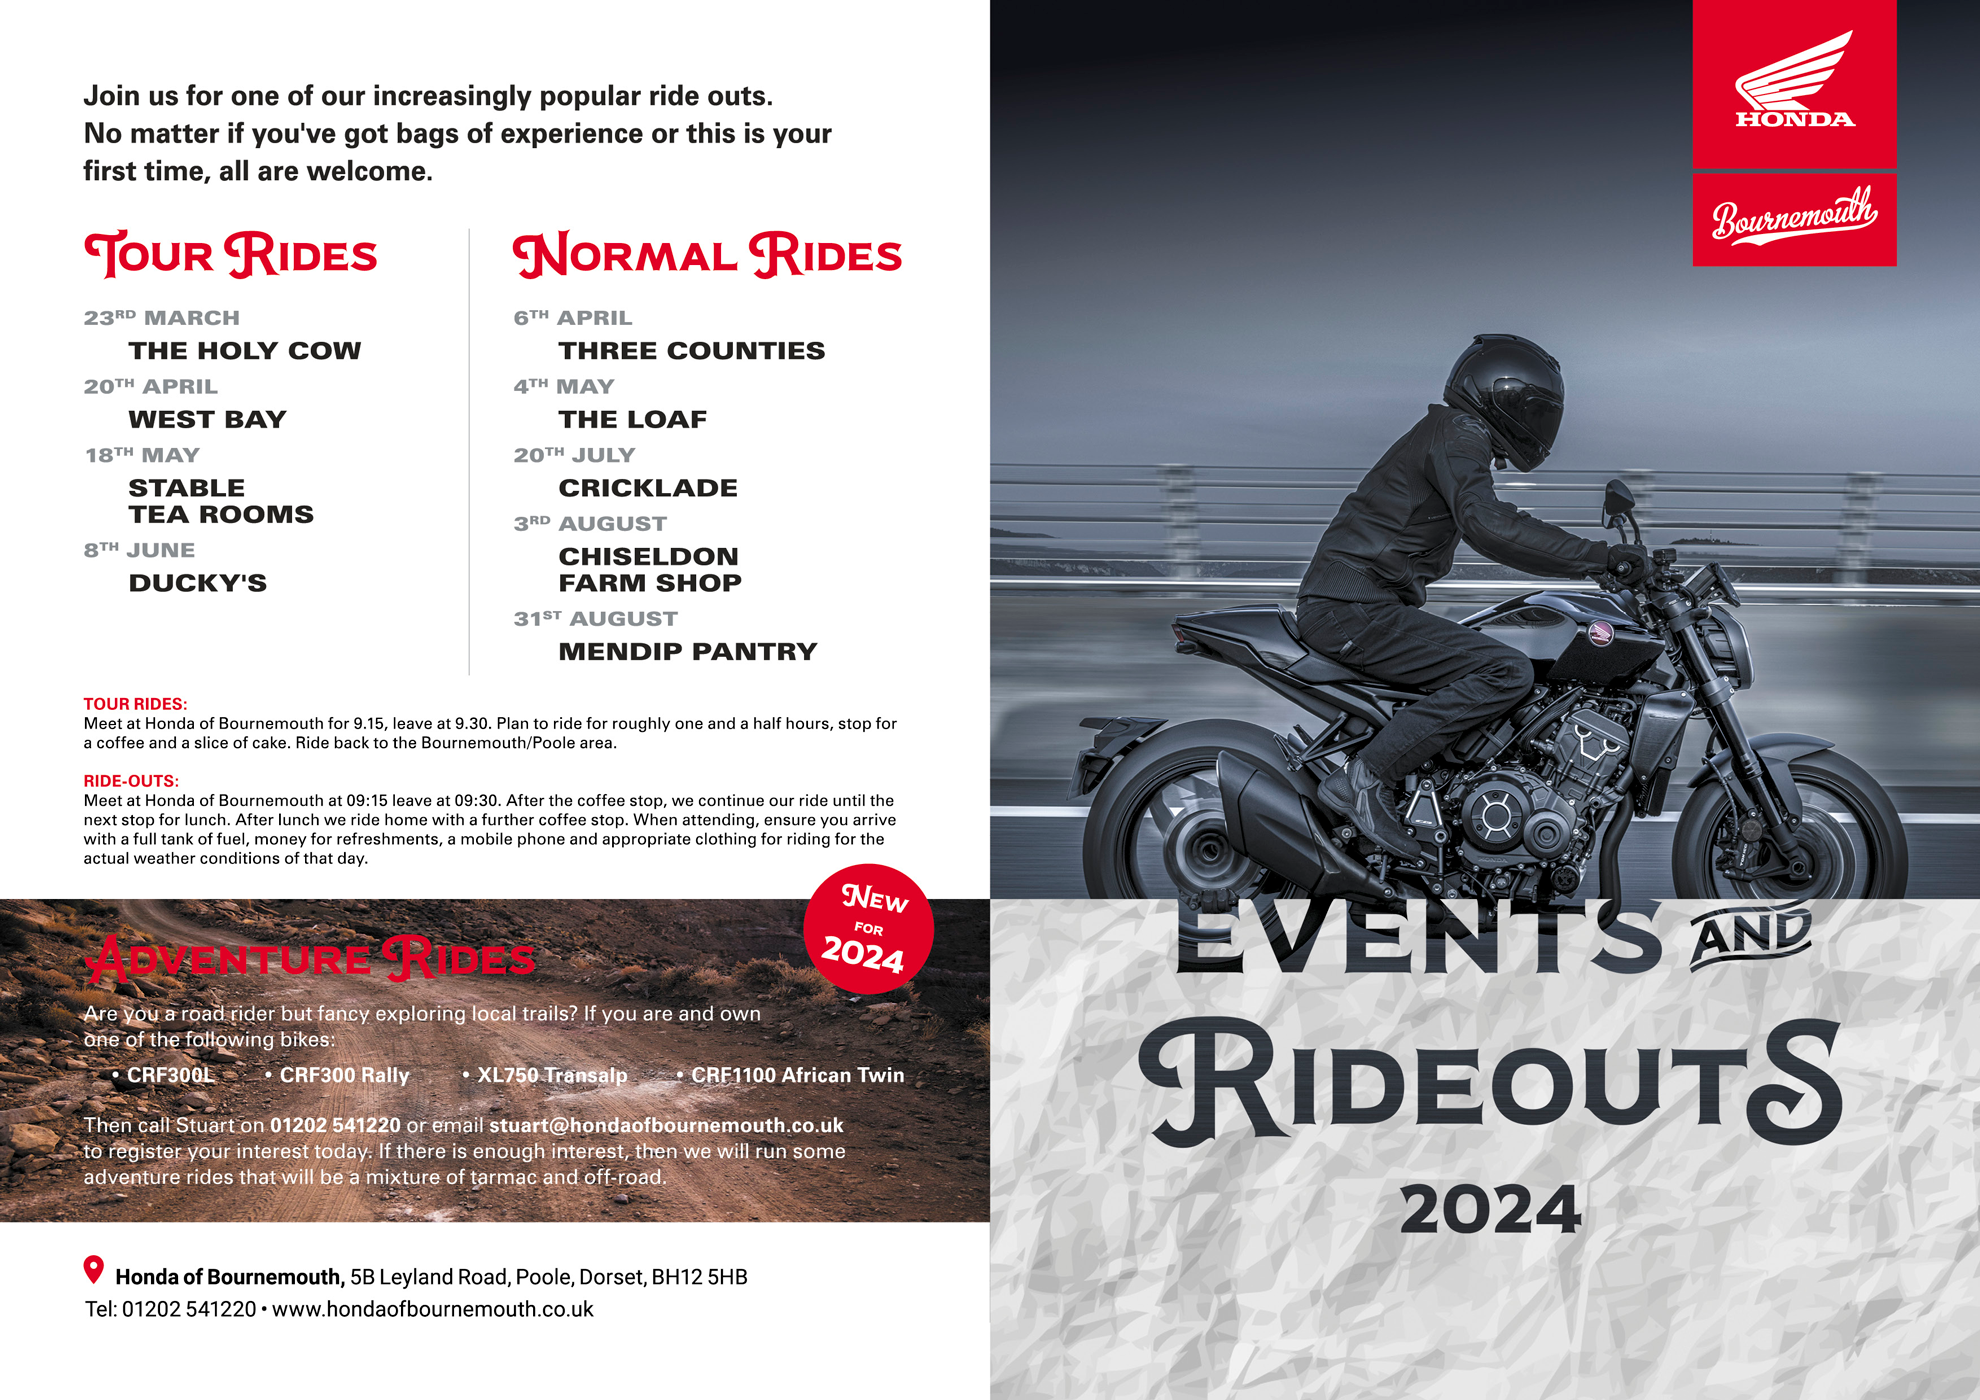 Honda of Bournemouth, Events and Ride Outs, Motorcycle Enthusiasts, Bikers in Dorset